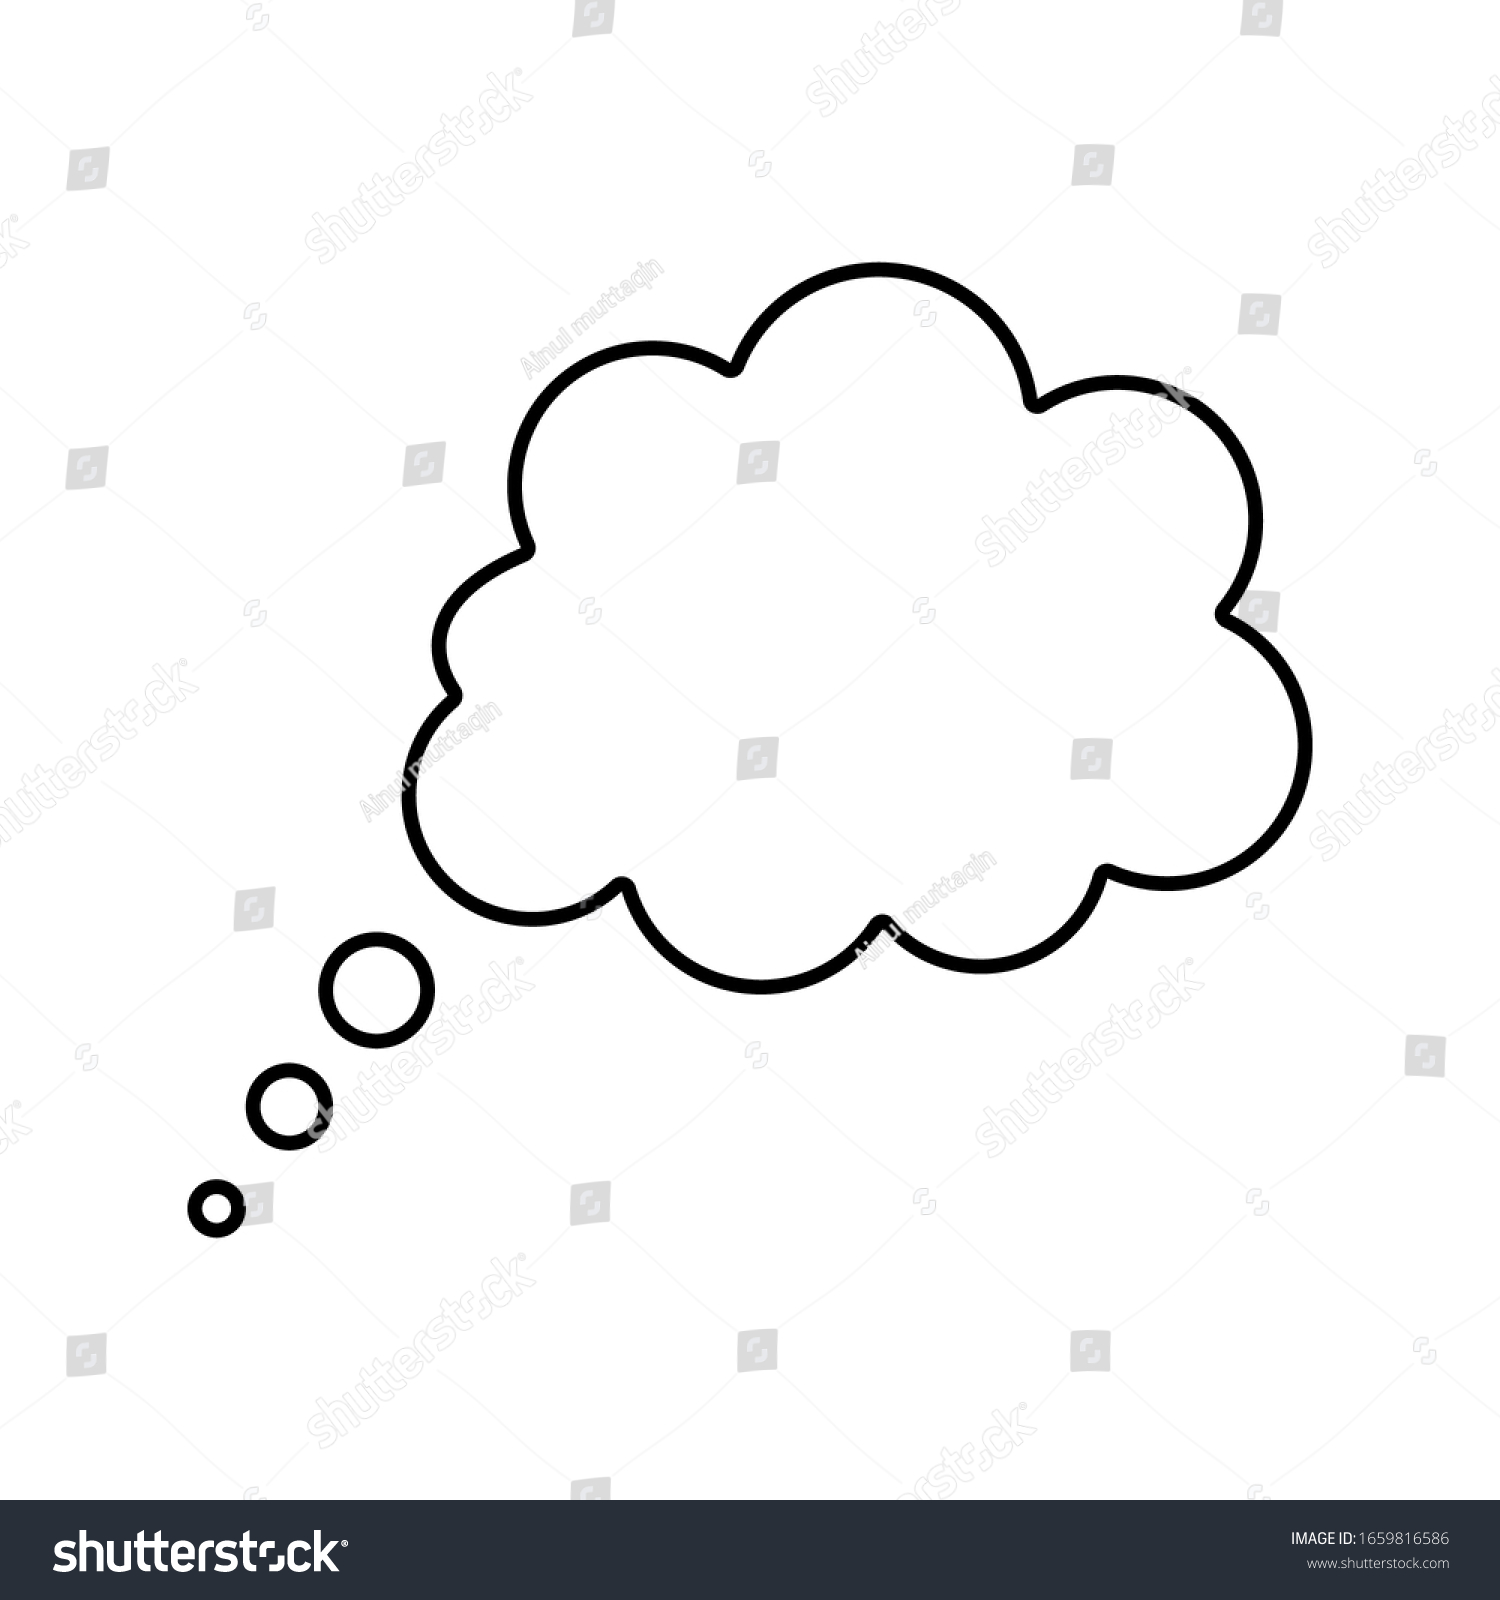 Think Bubble Isolated Trendy Think Bubble Stock Vector (Royalty Free ...